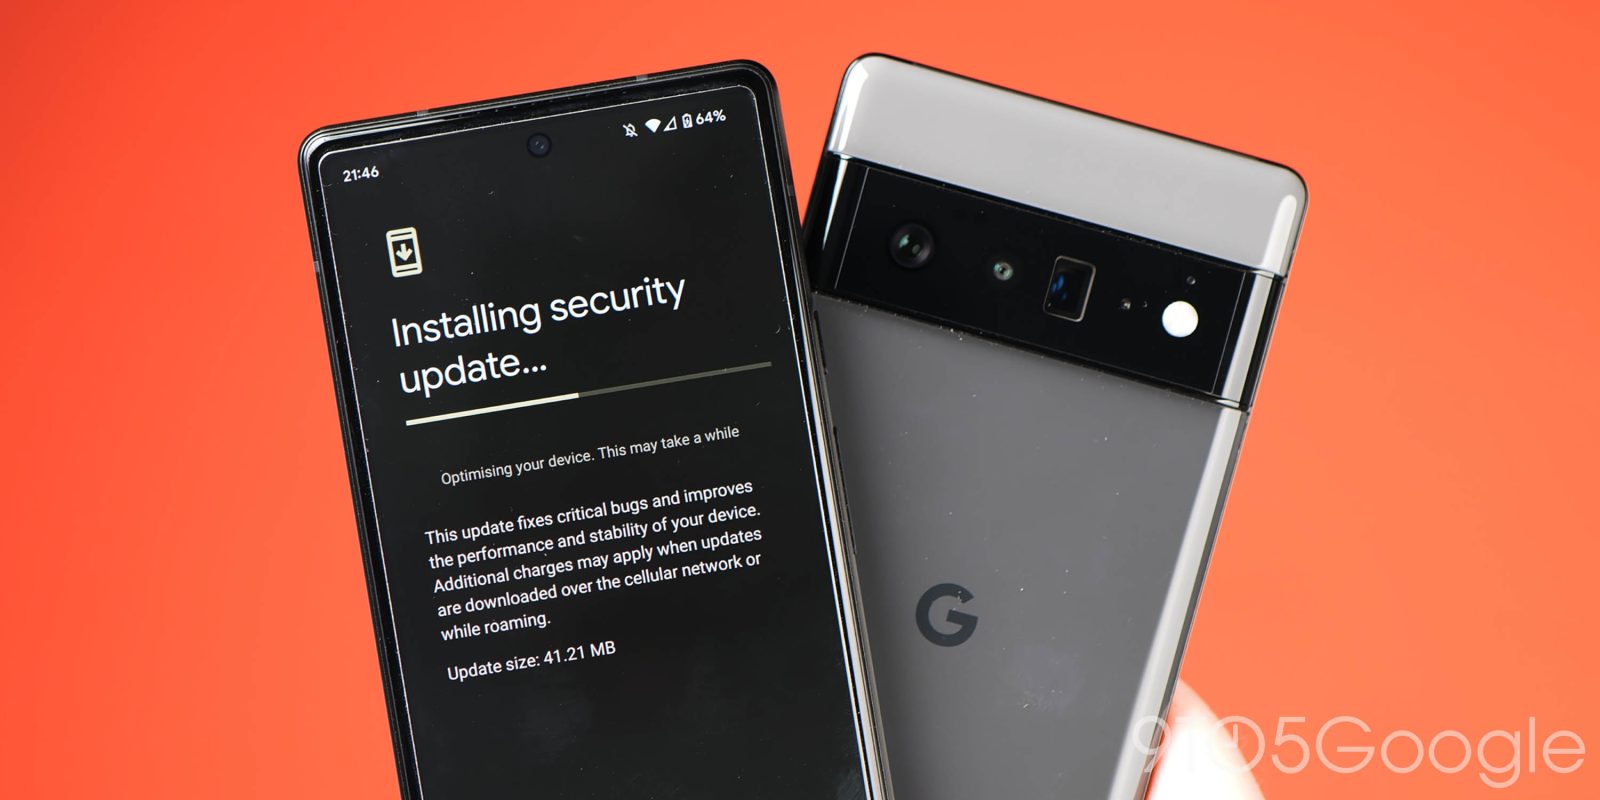 Pixel 6 January patch: Has this update fixed common issues? - 9to5Google